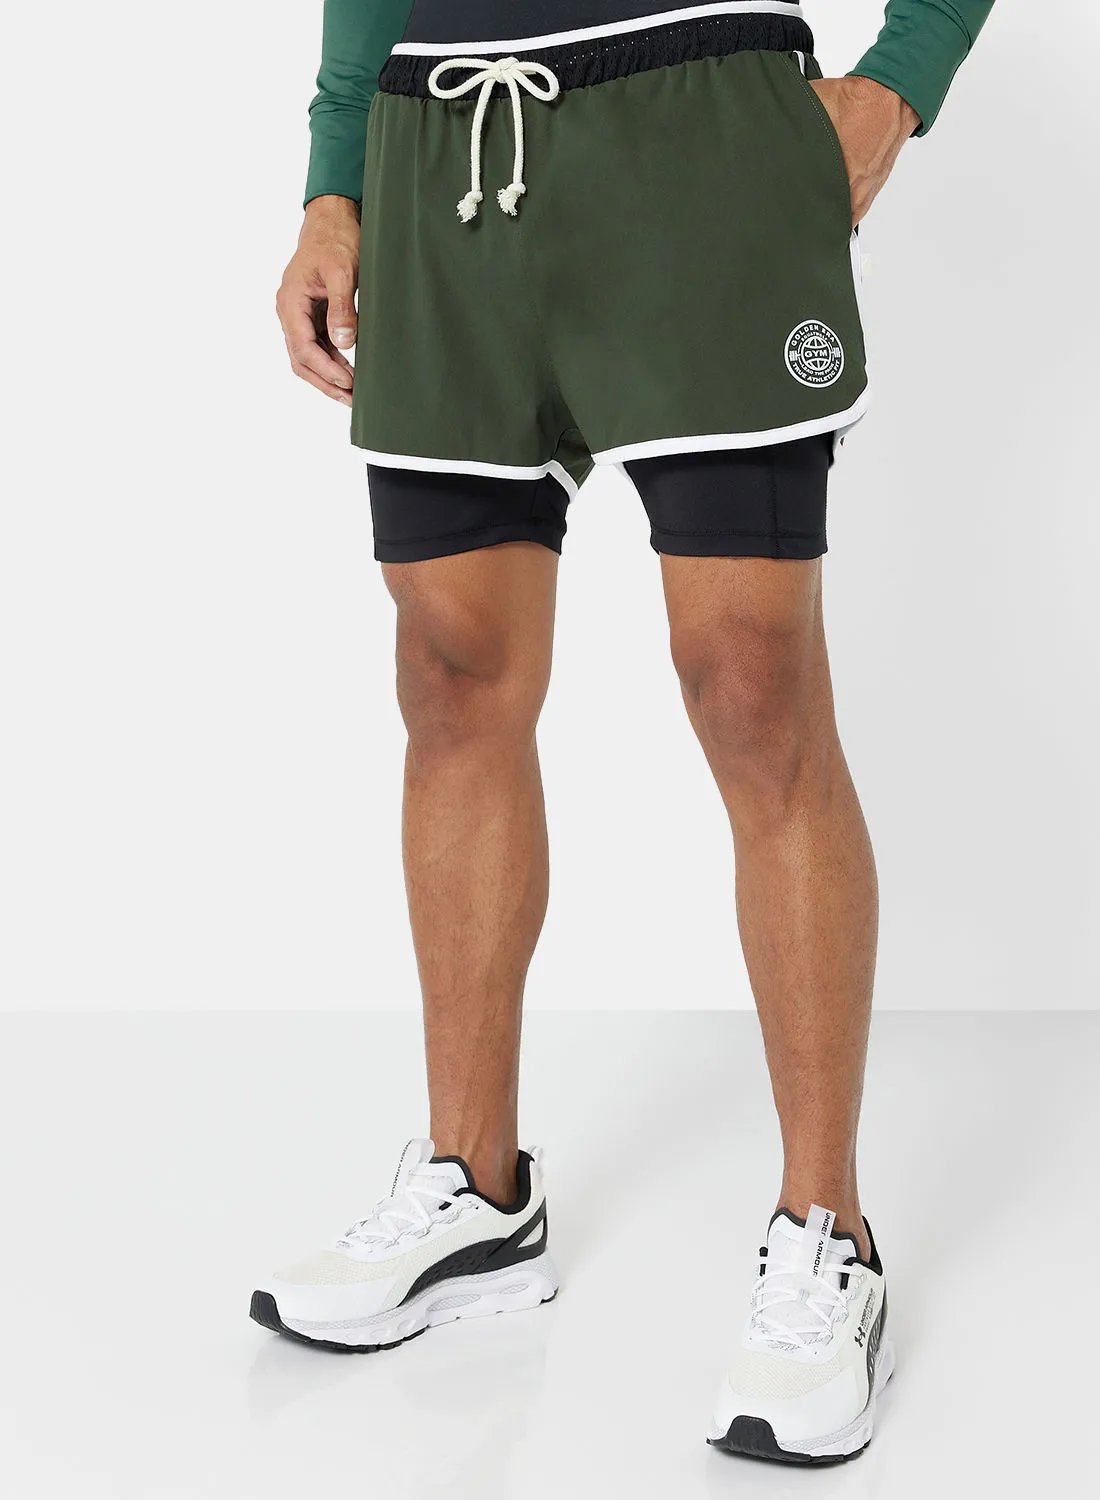 SQUATWOLF 2-In-1 Shorts